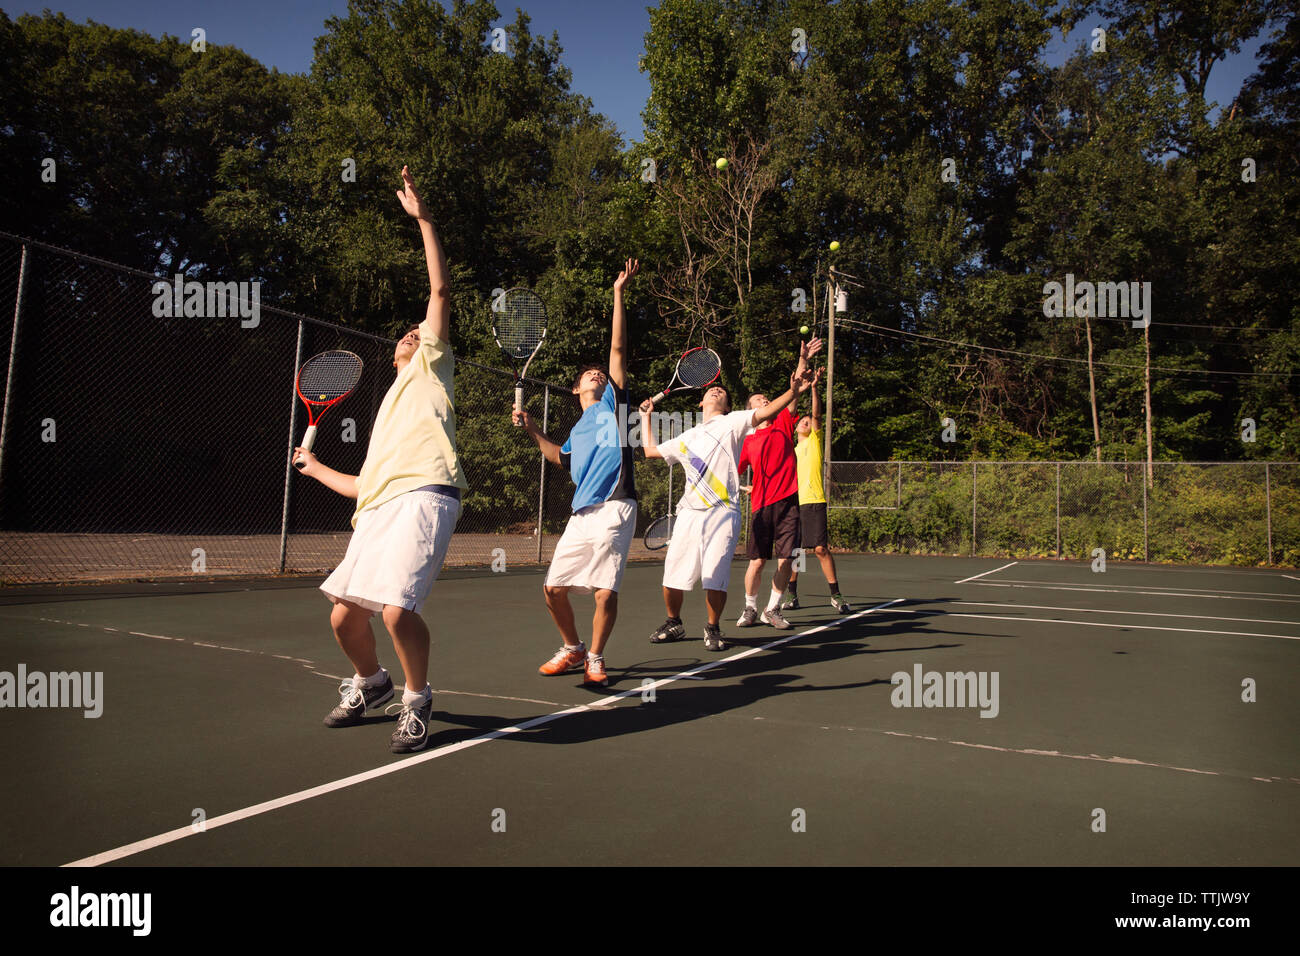 Players standing in row playing tennis at court Stock Photo